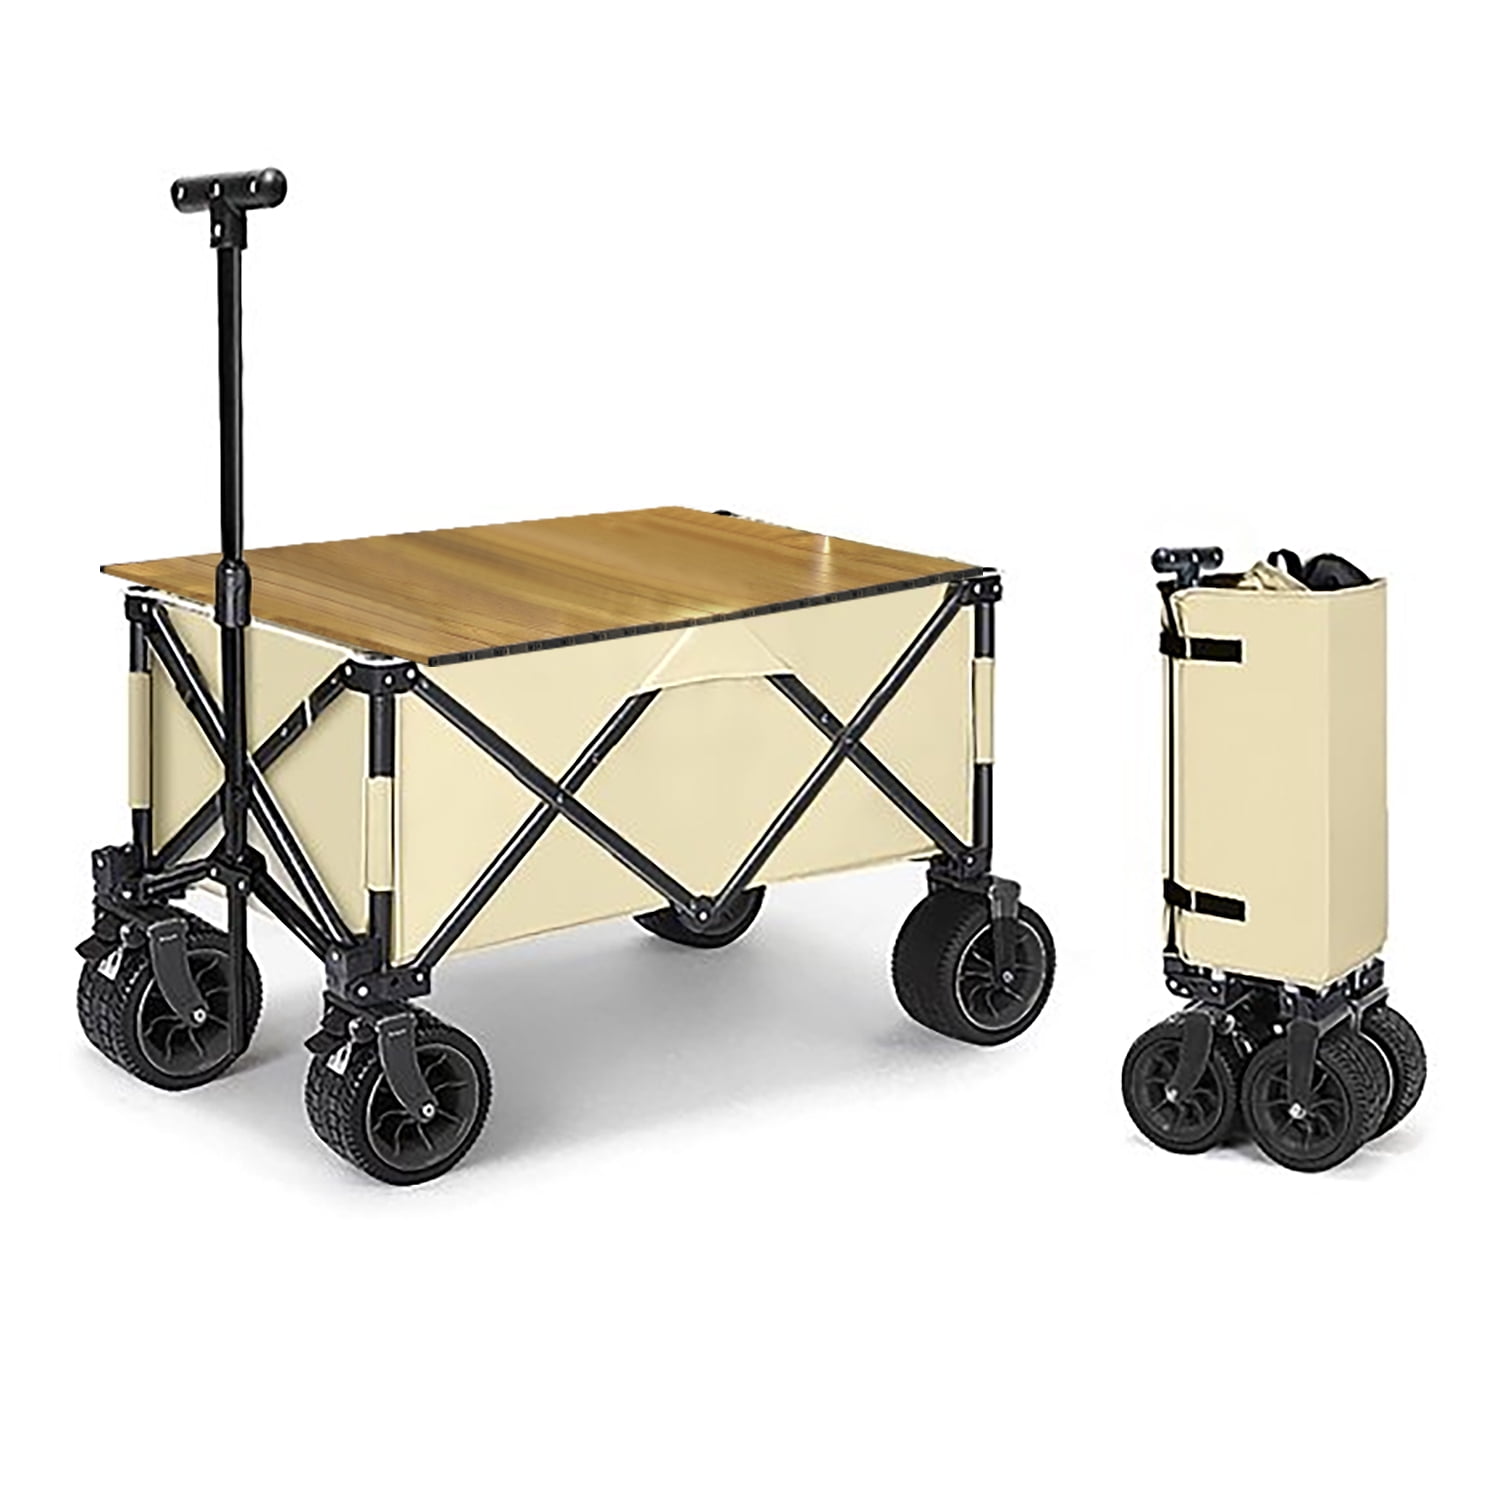 54.13'' H x 39.5'' W Utility Cart with Wheels